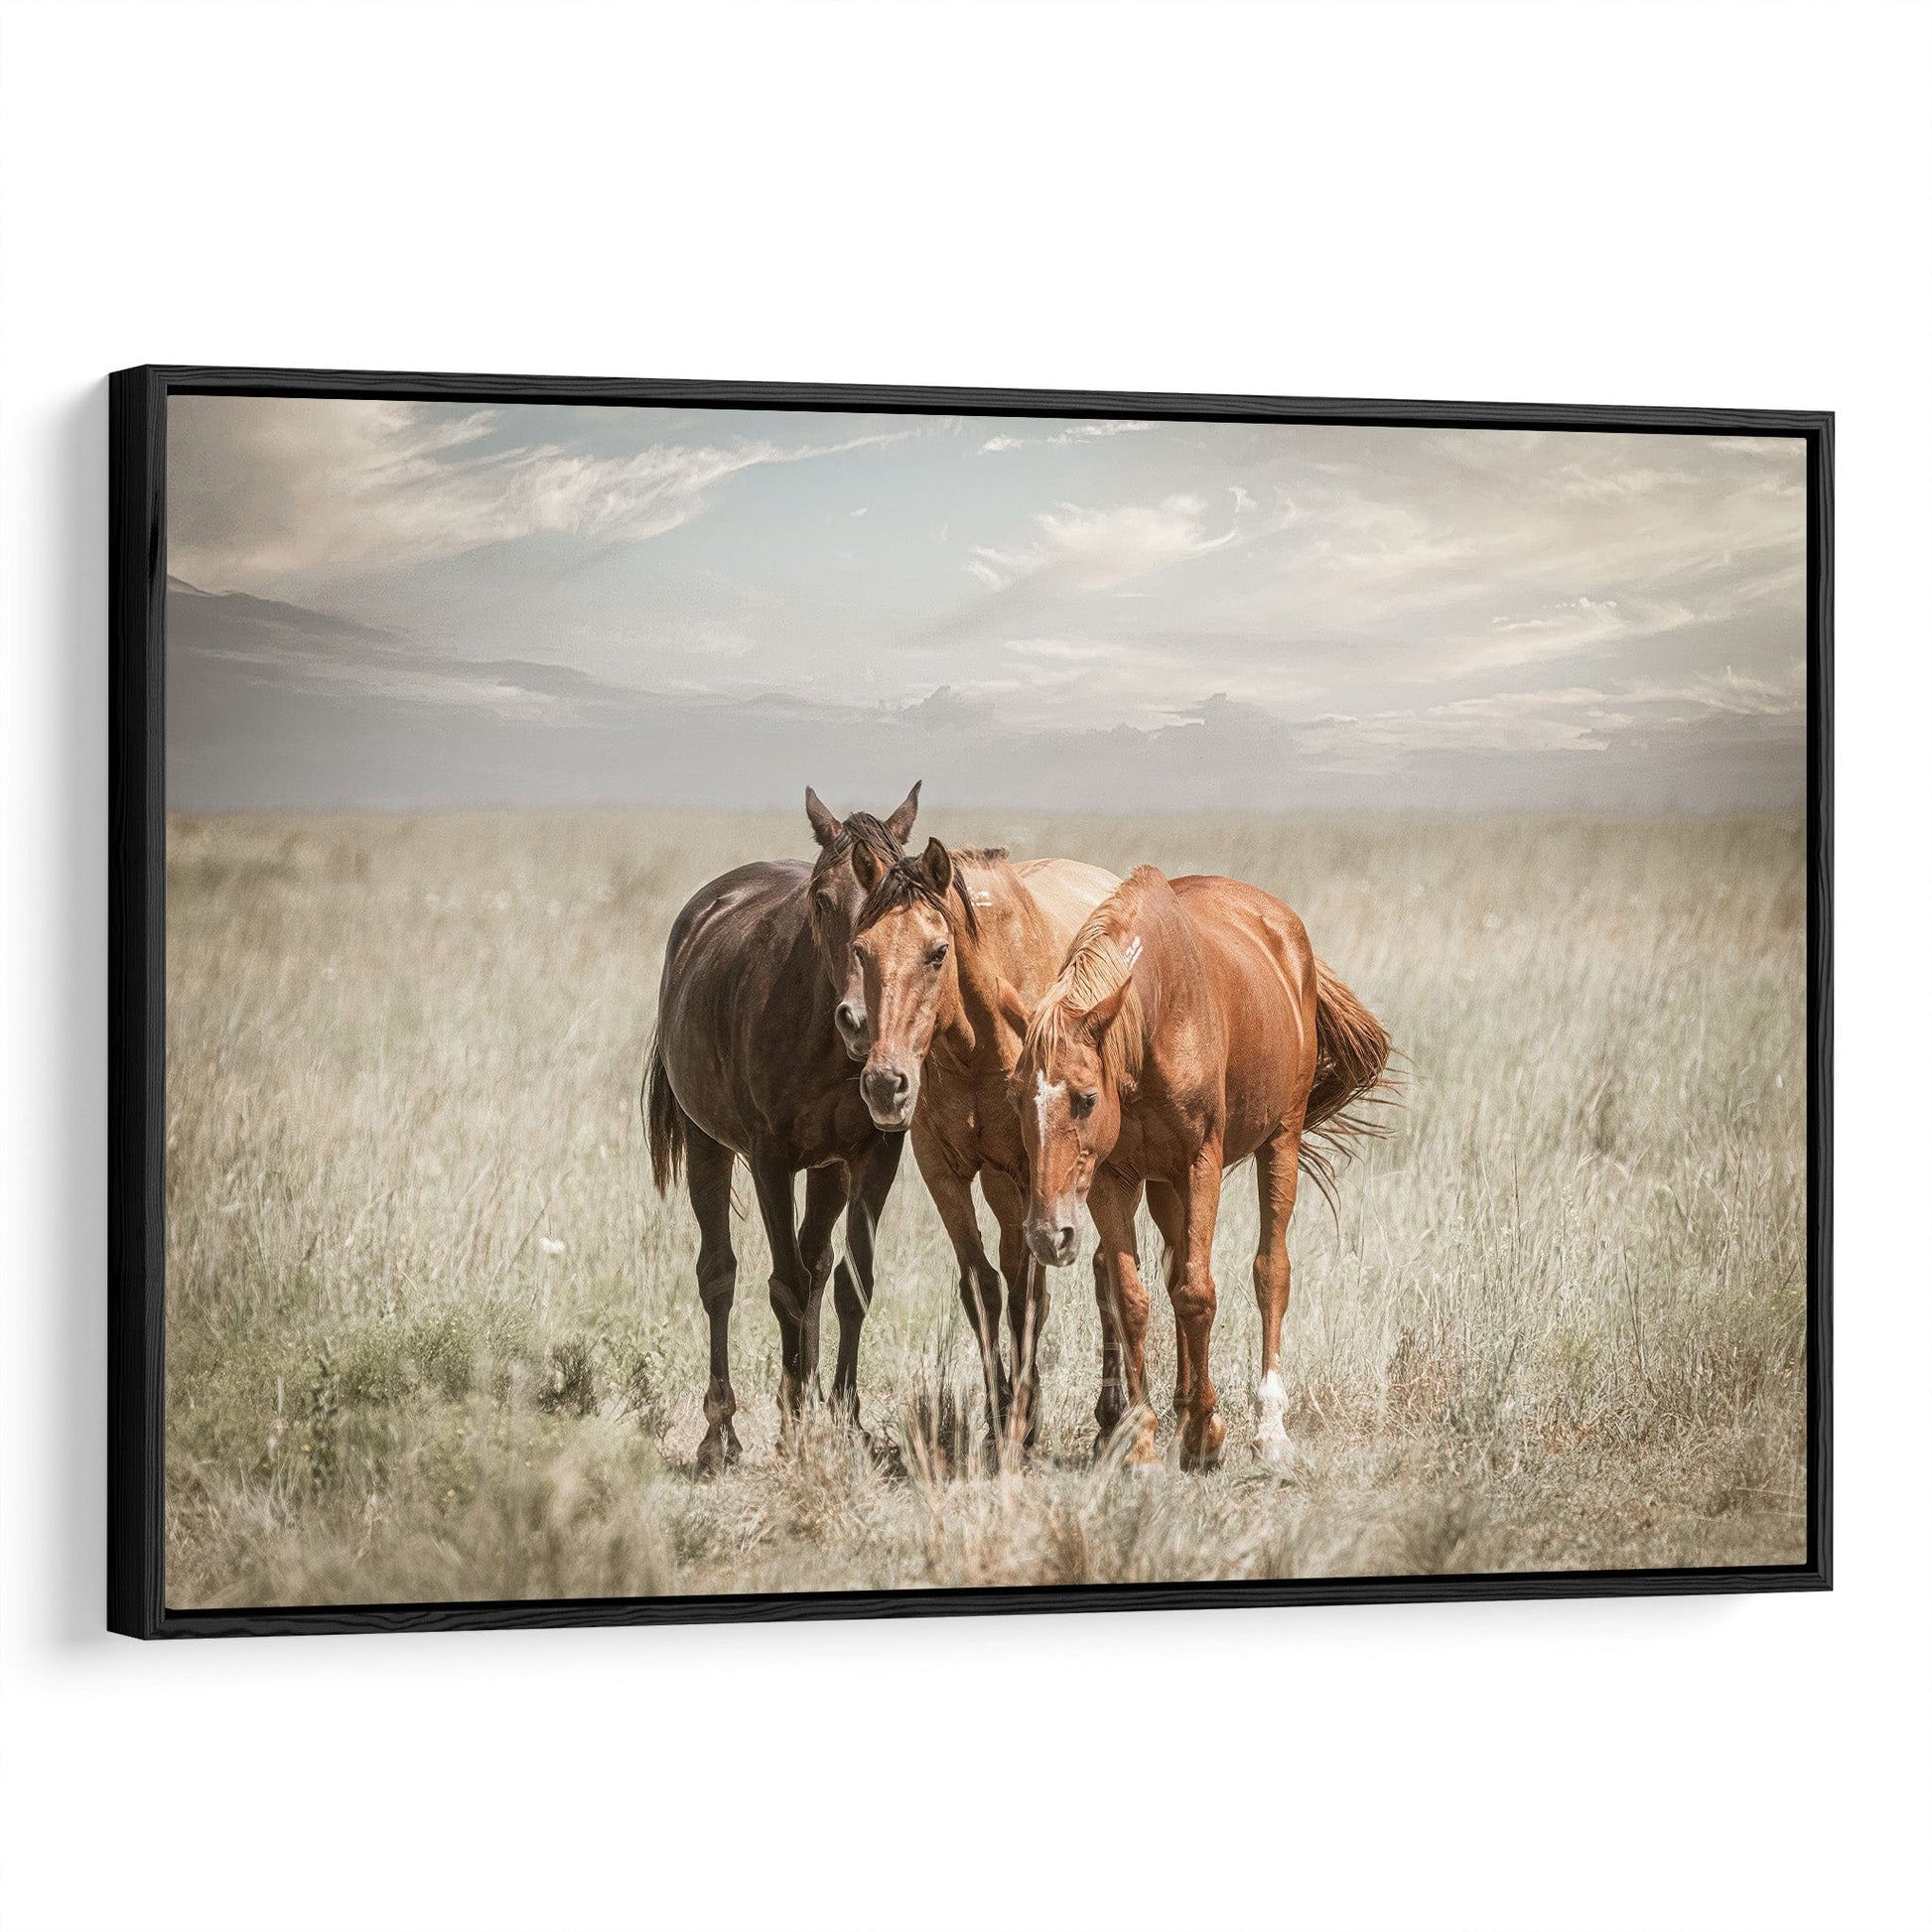 Horse Wall Art Old Friends on the Osage Canvas-Black Frame / 12 x 18 Inches Wall Art Teri James Photography